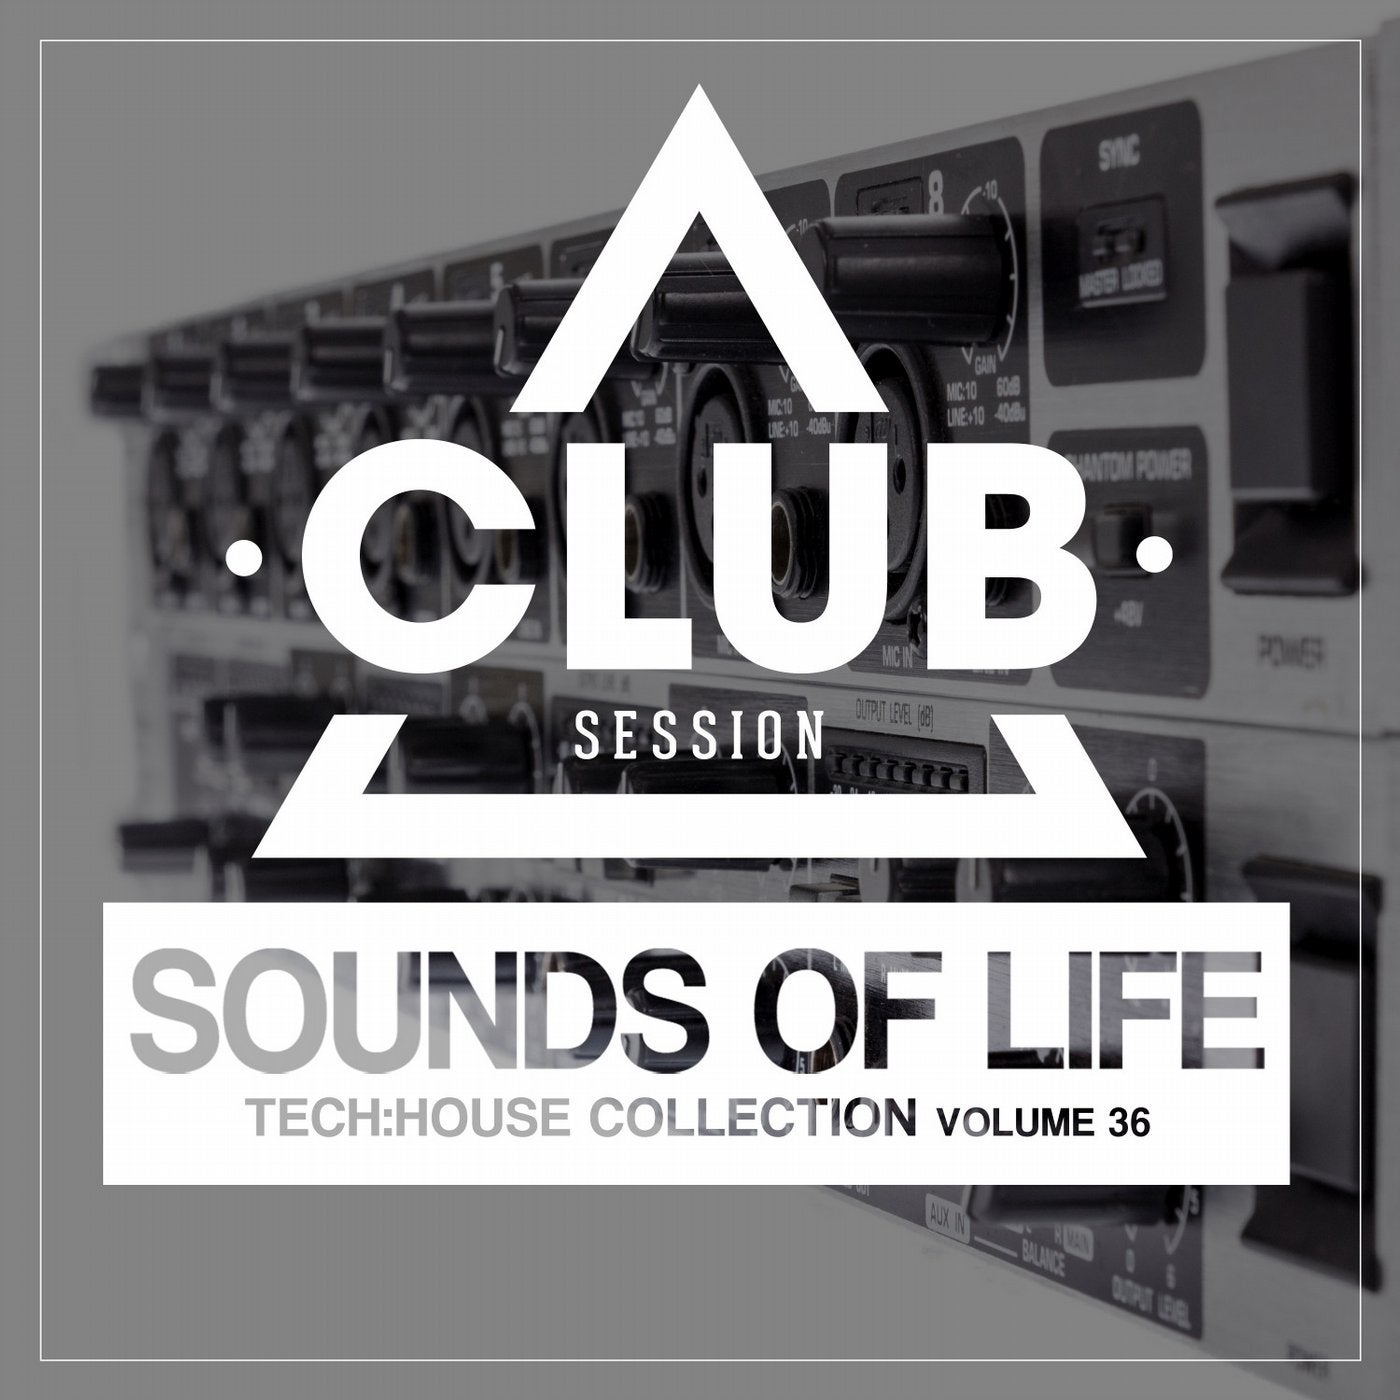 Sounds Of Life - Tech:House Collection Vol. 36